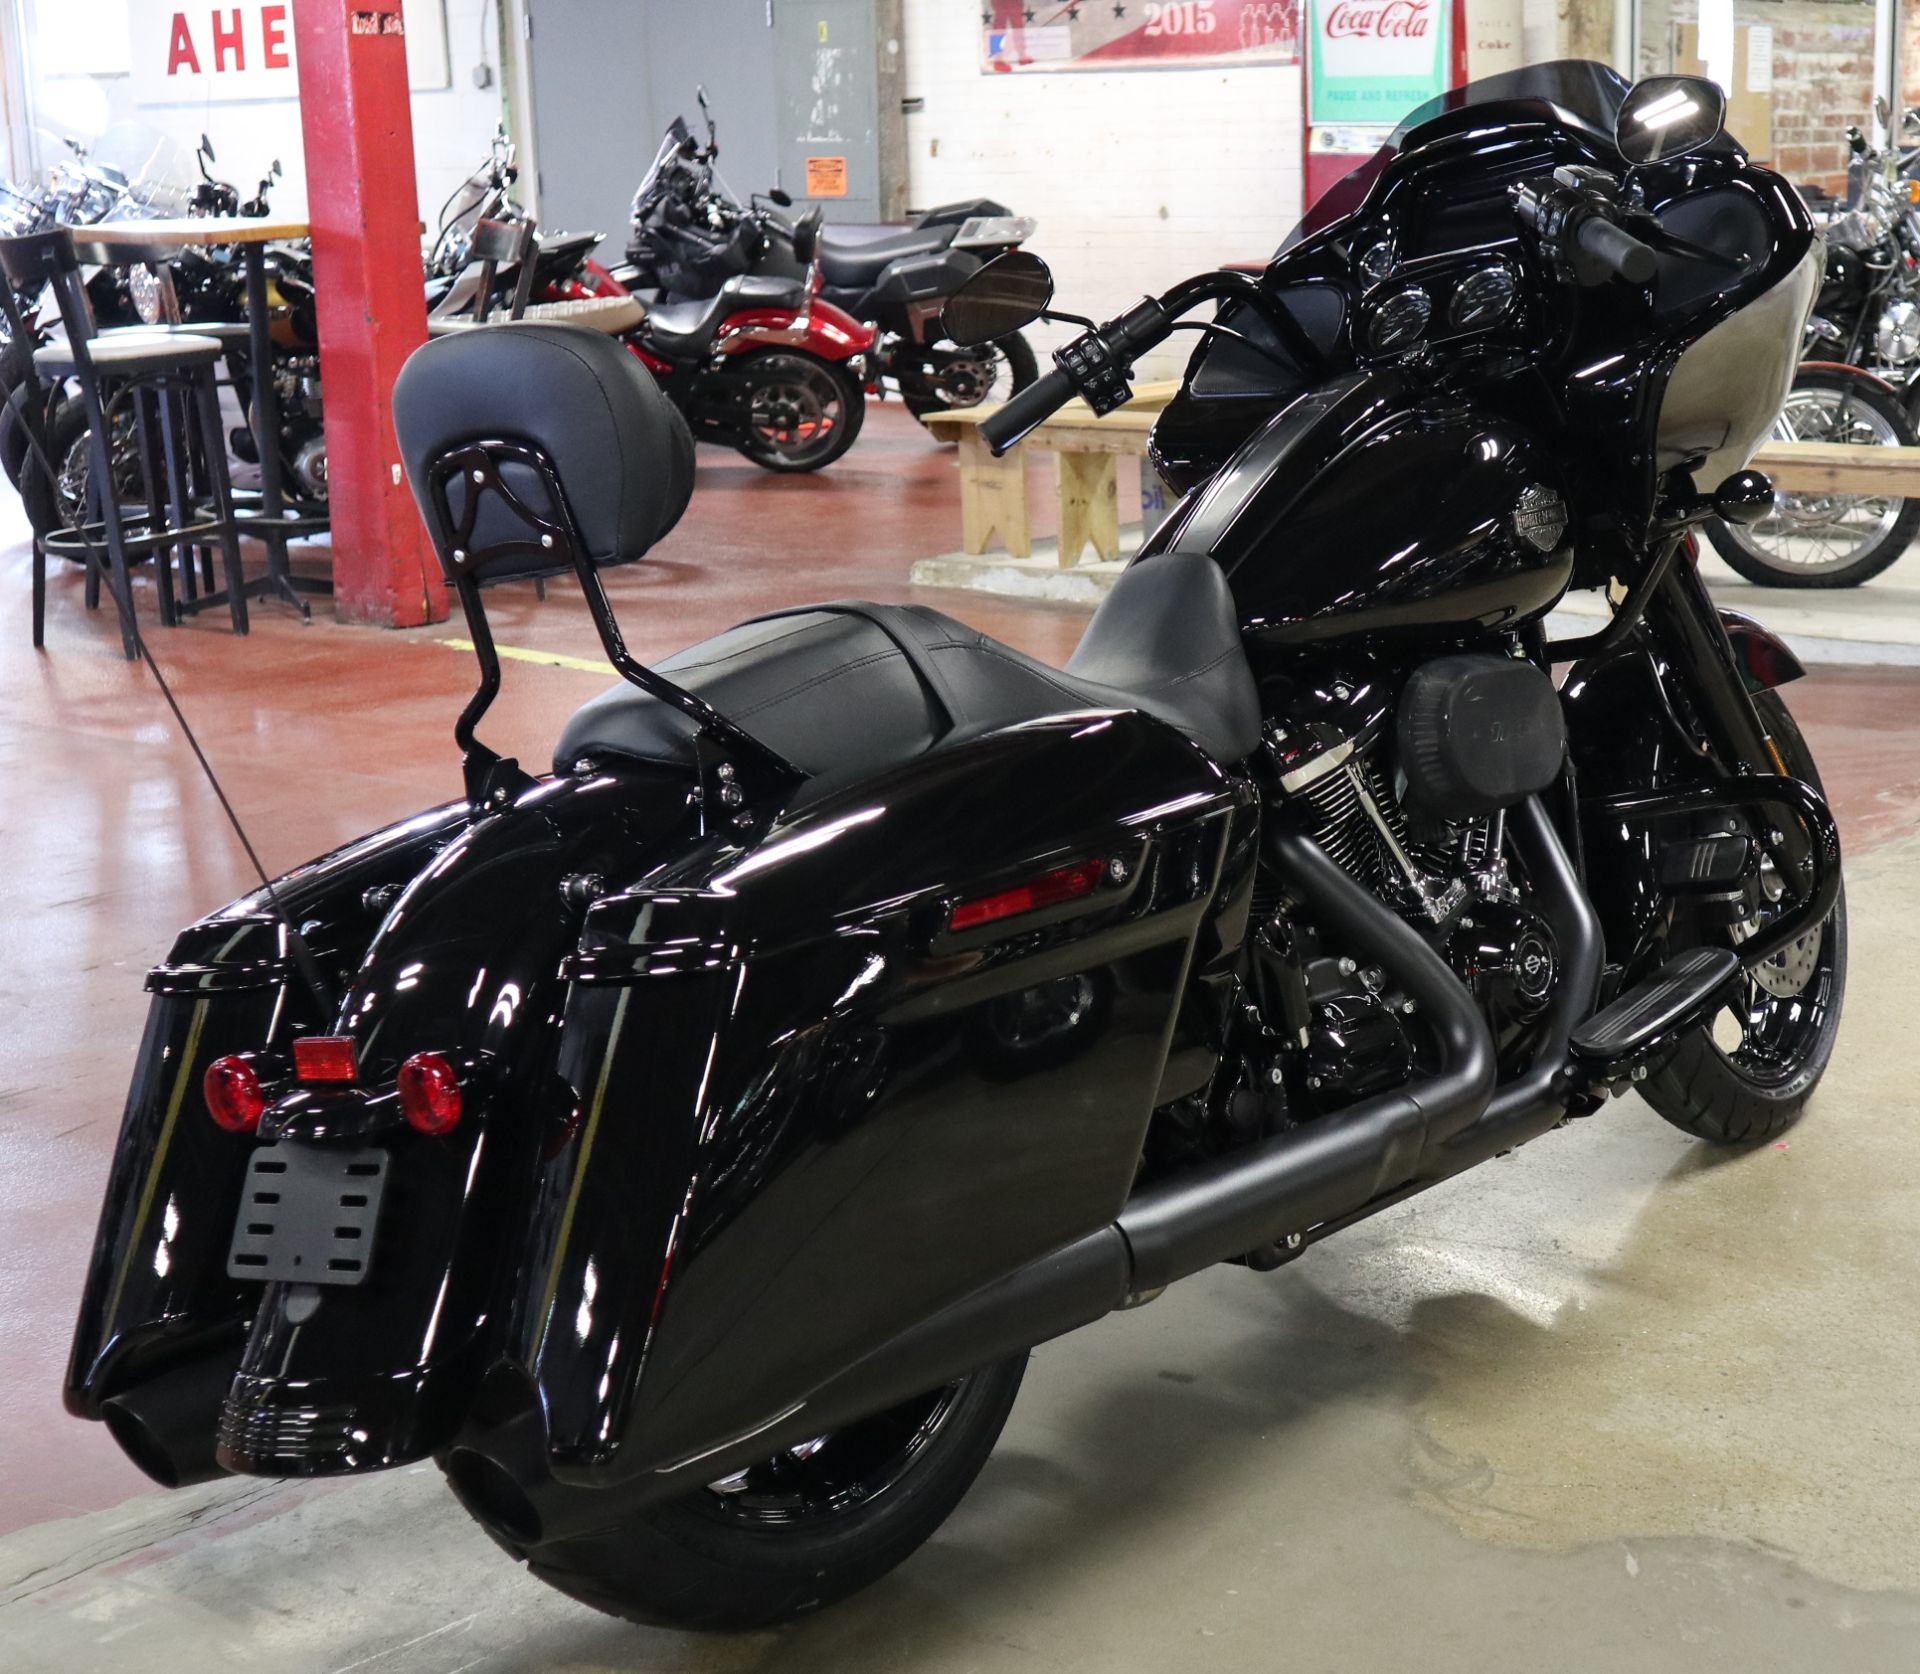 2023 Harley-Davidson Road Glide® Special in New London, Connecticut - Photo 8